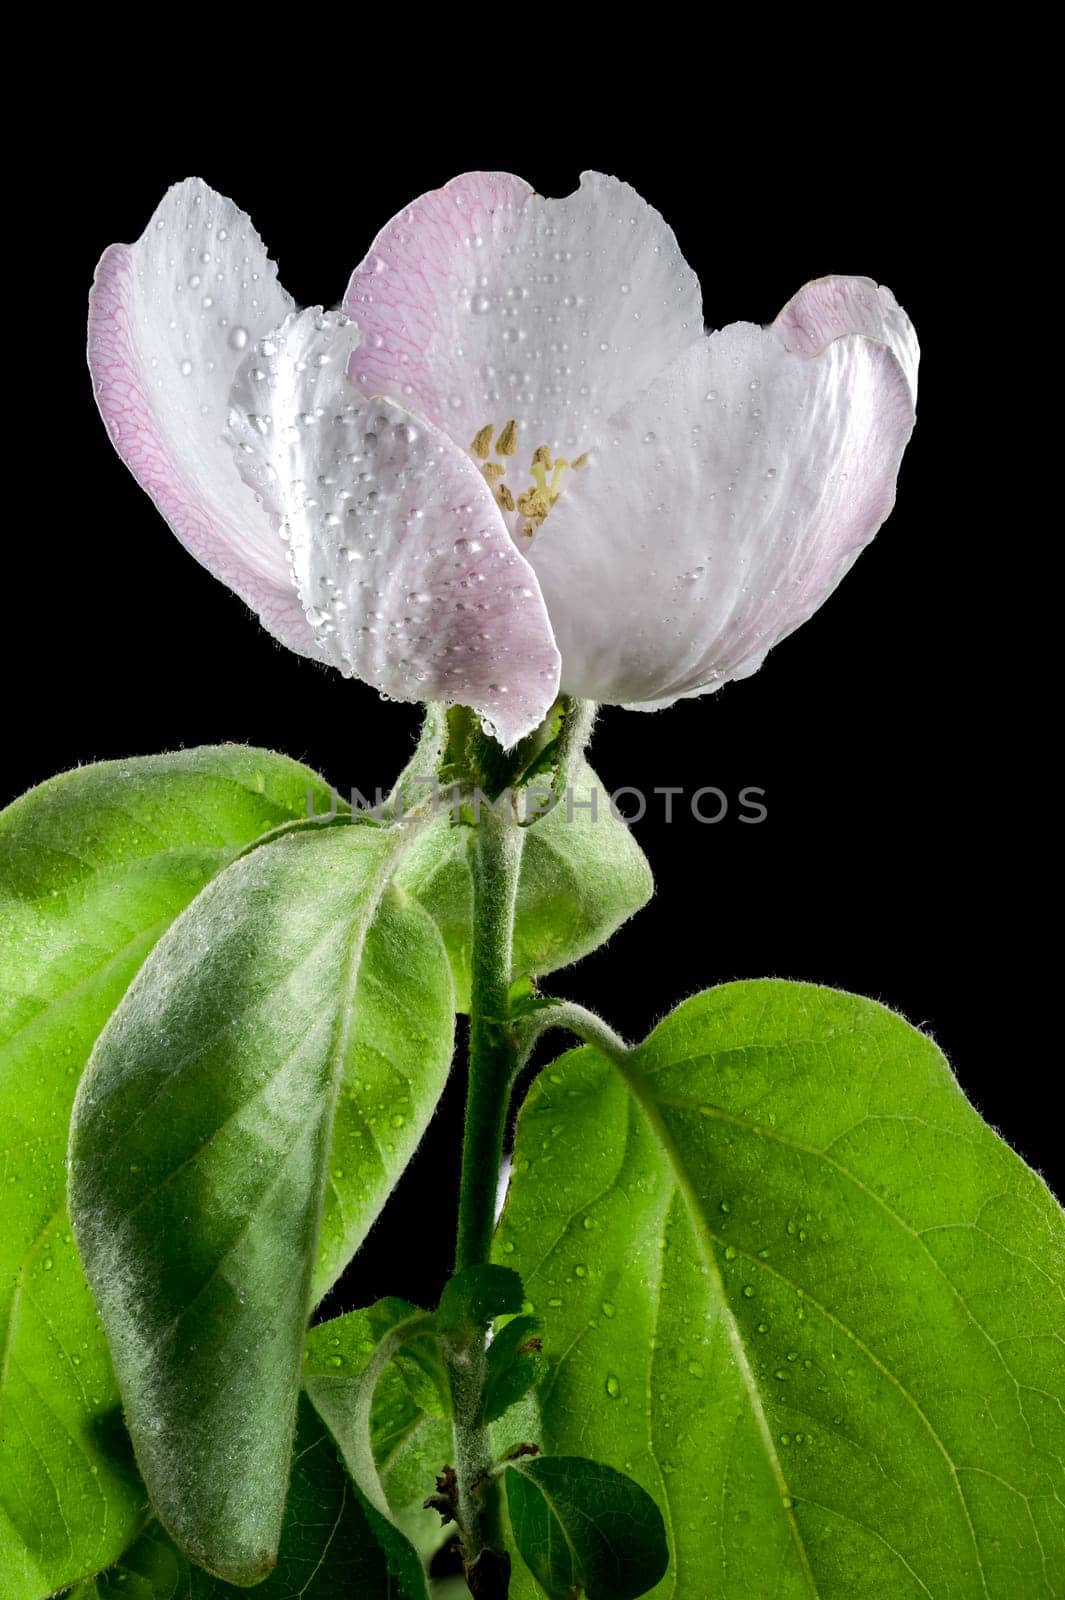 Beautiful white Quince tree flower blossom isolated on a black background. Flower head close-up.